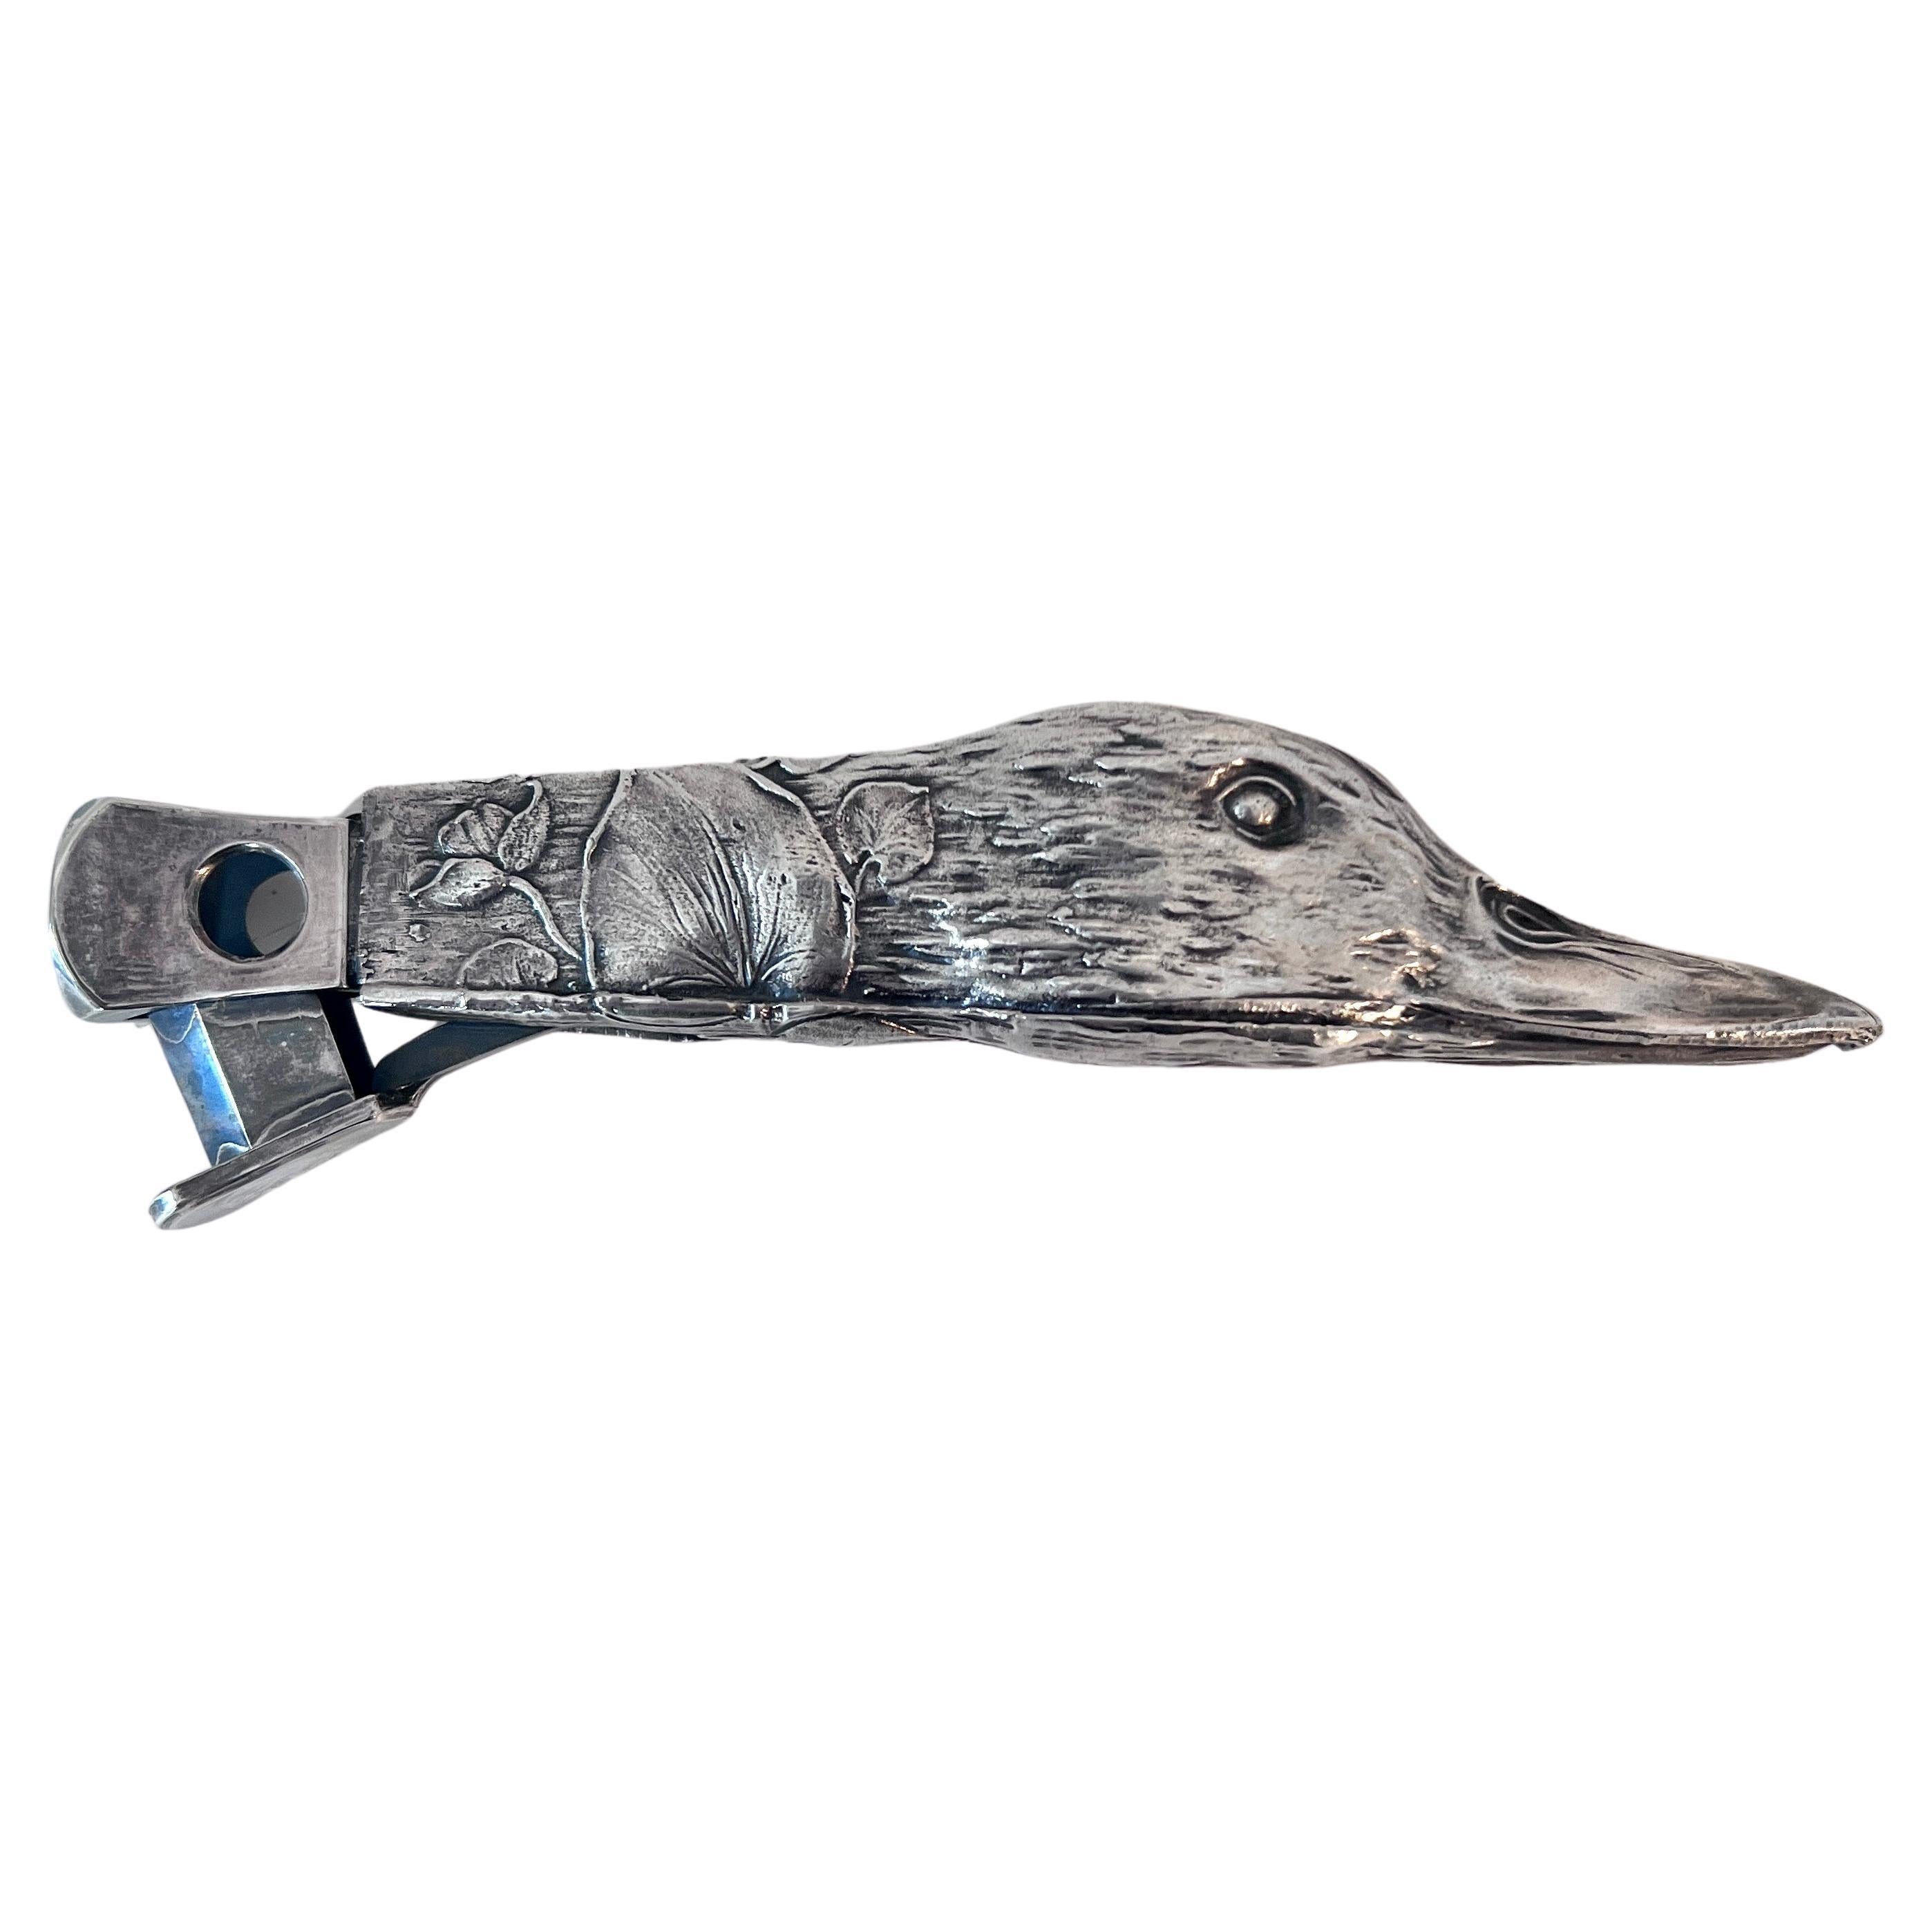 Nickel Silver Cigar, Cigarette or 420 Cutter in the form of a Repoussé Duck 